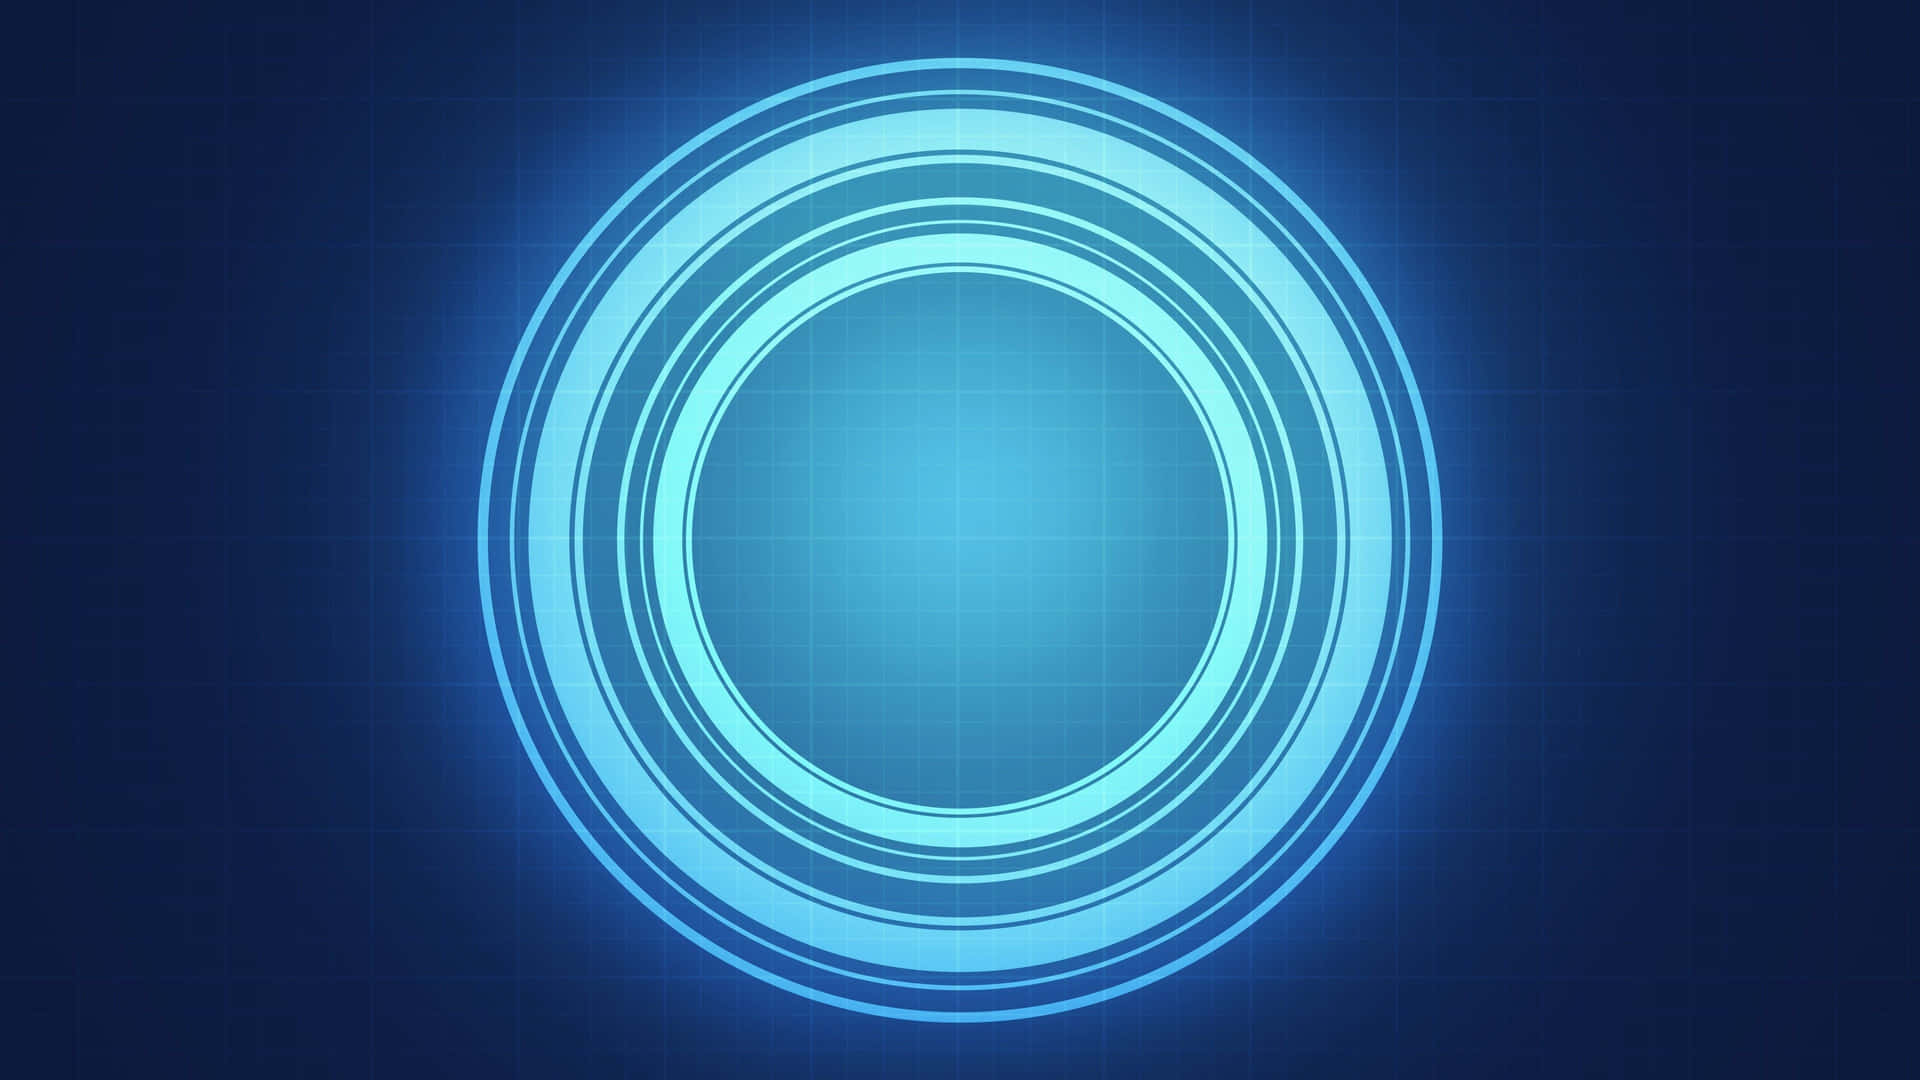 Abstract Blue Circles Background Wallpaper